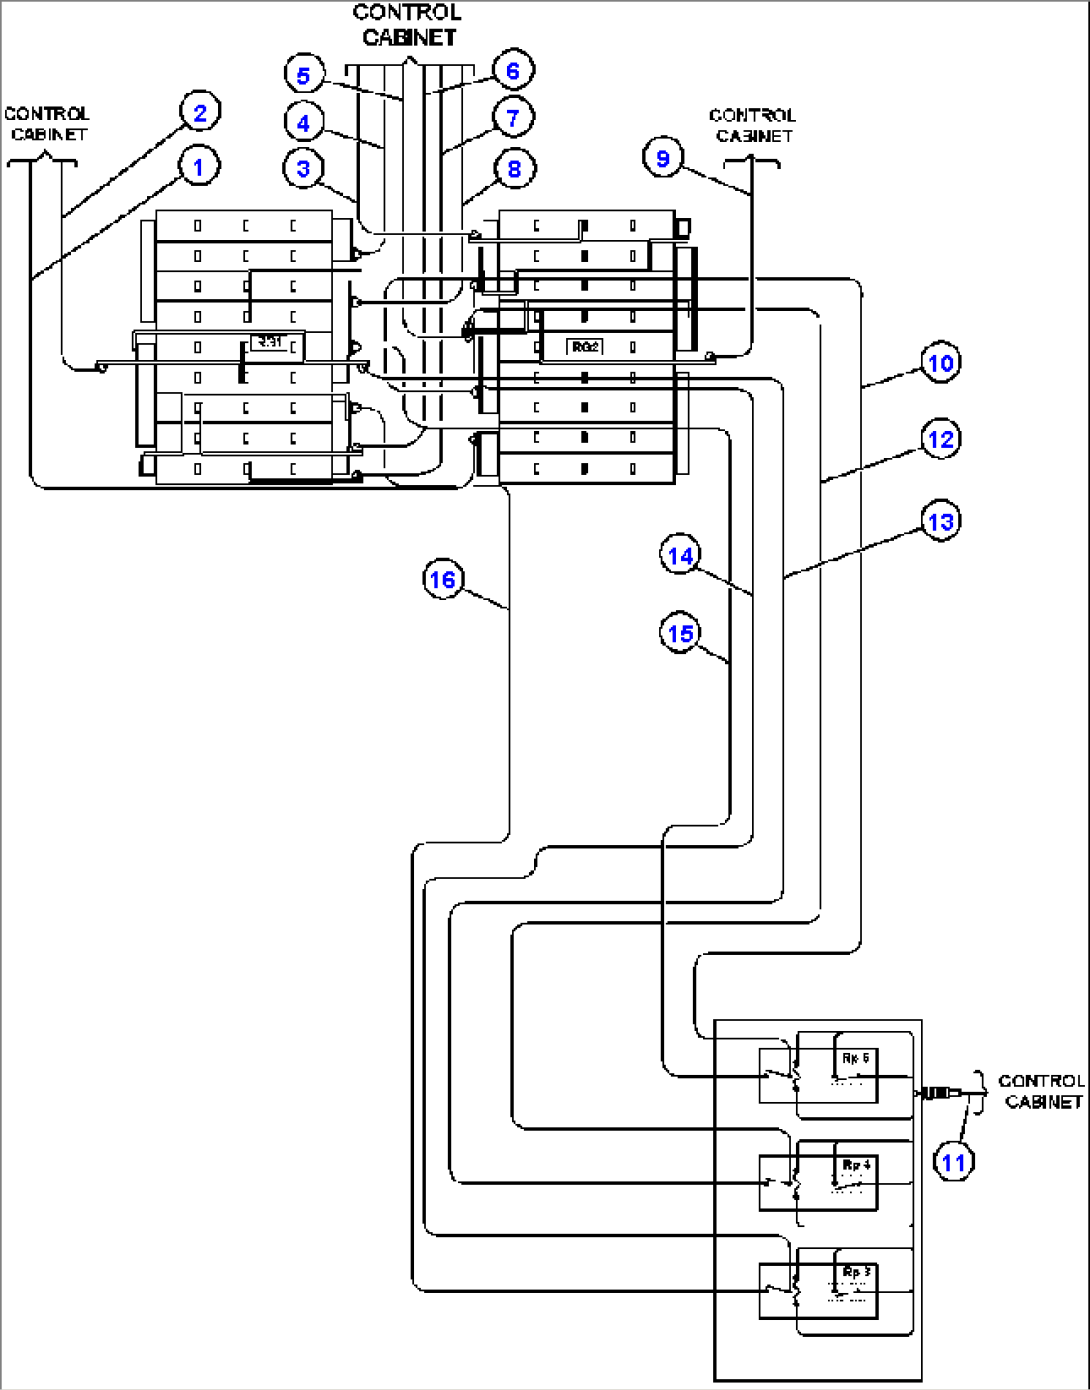 ELECTRIC POWER COMPONENTS WIRING (TROLLEY) - 1